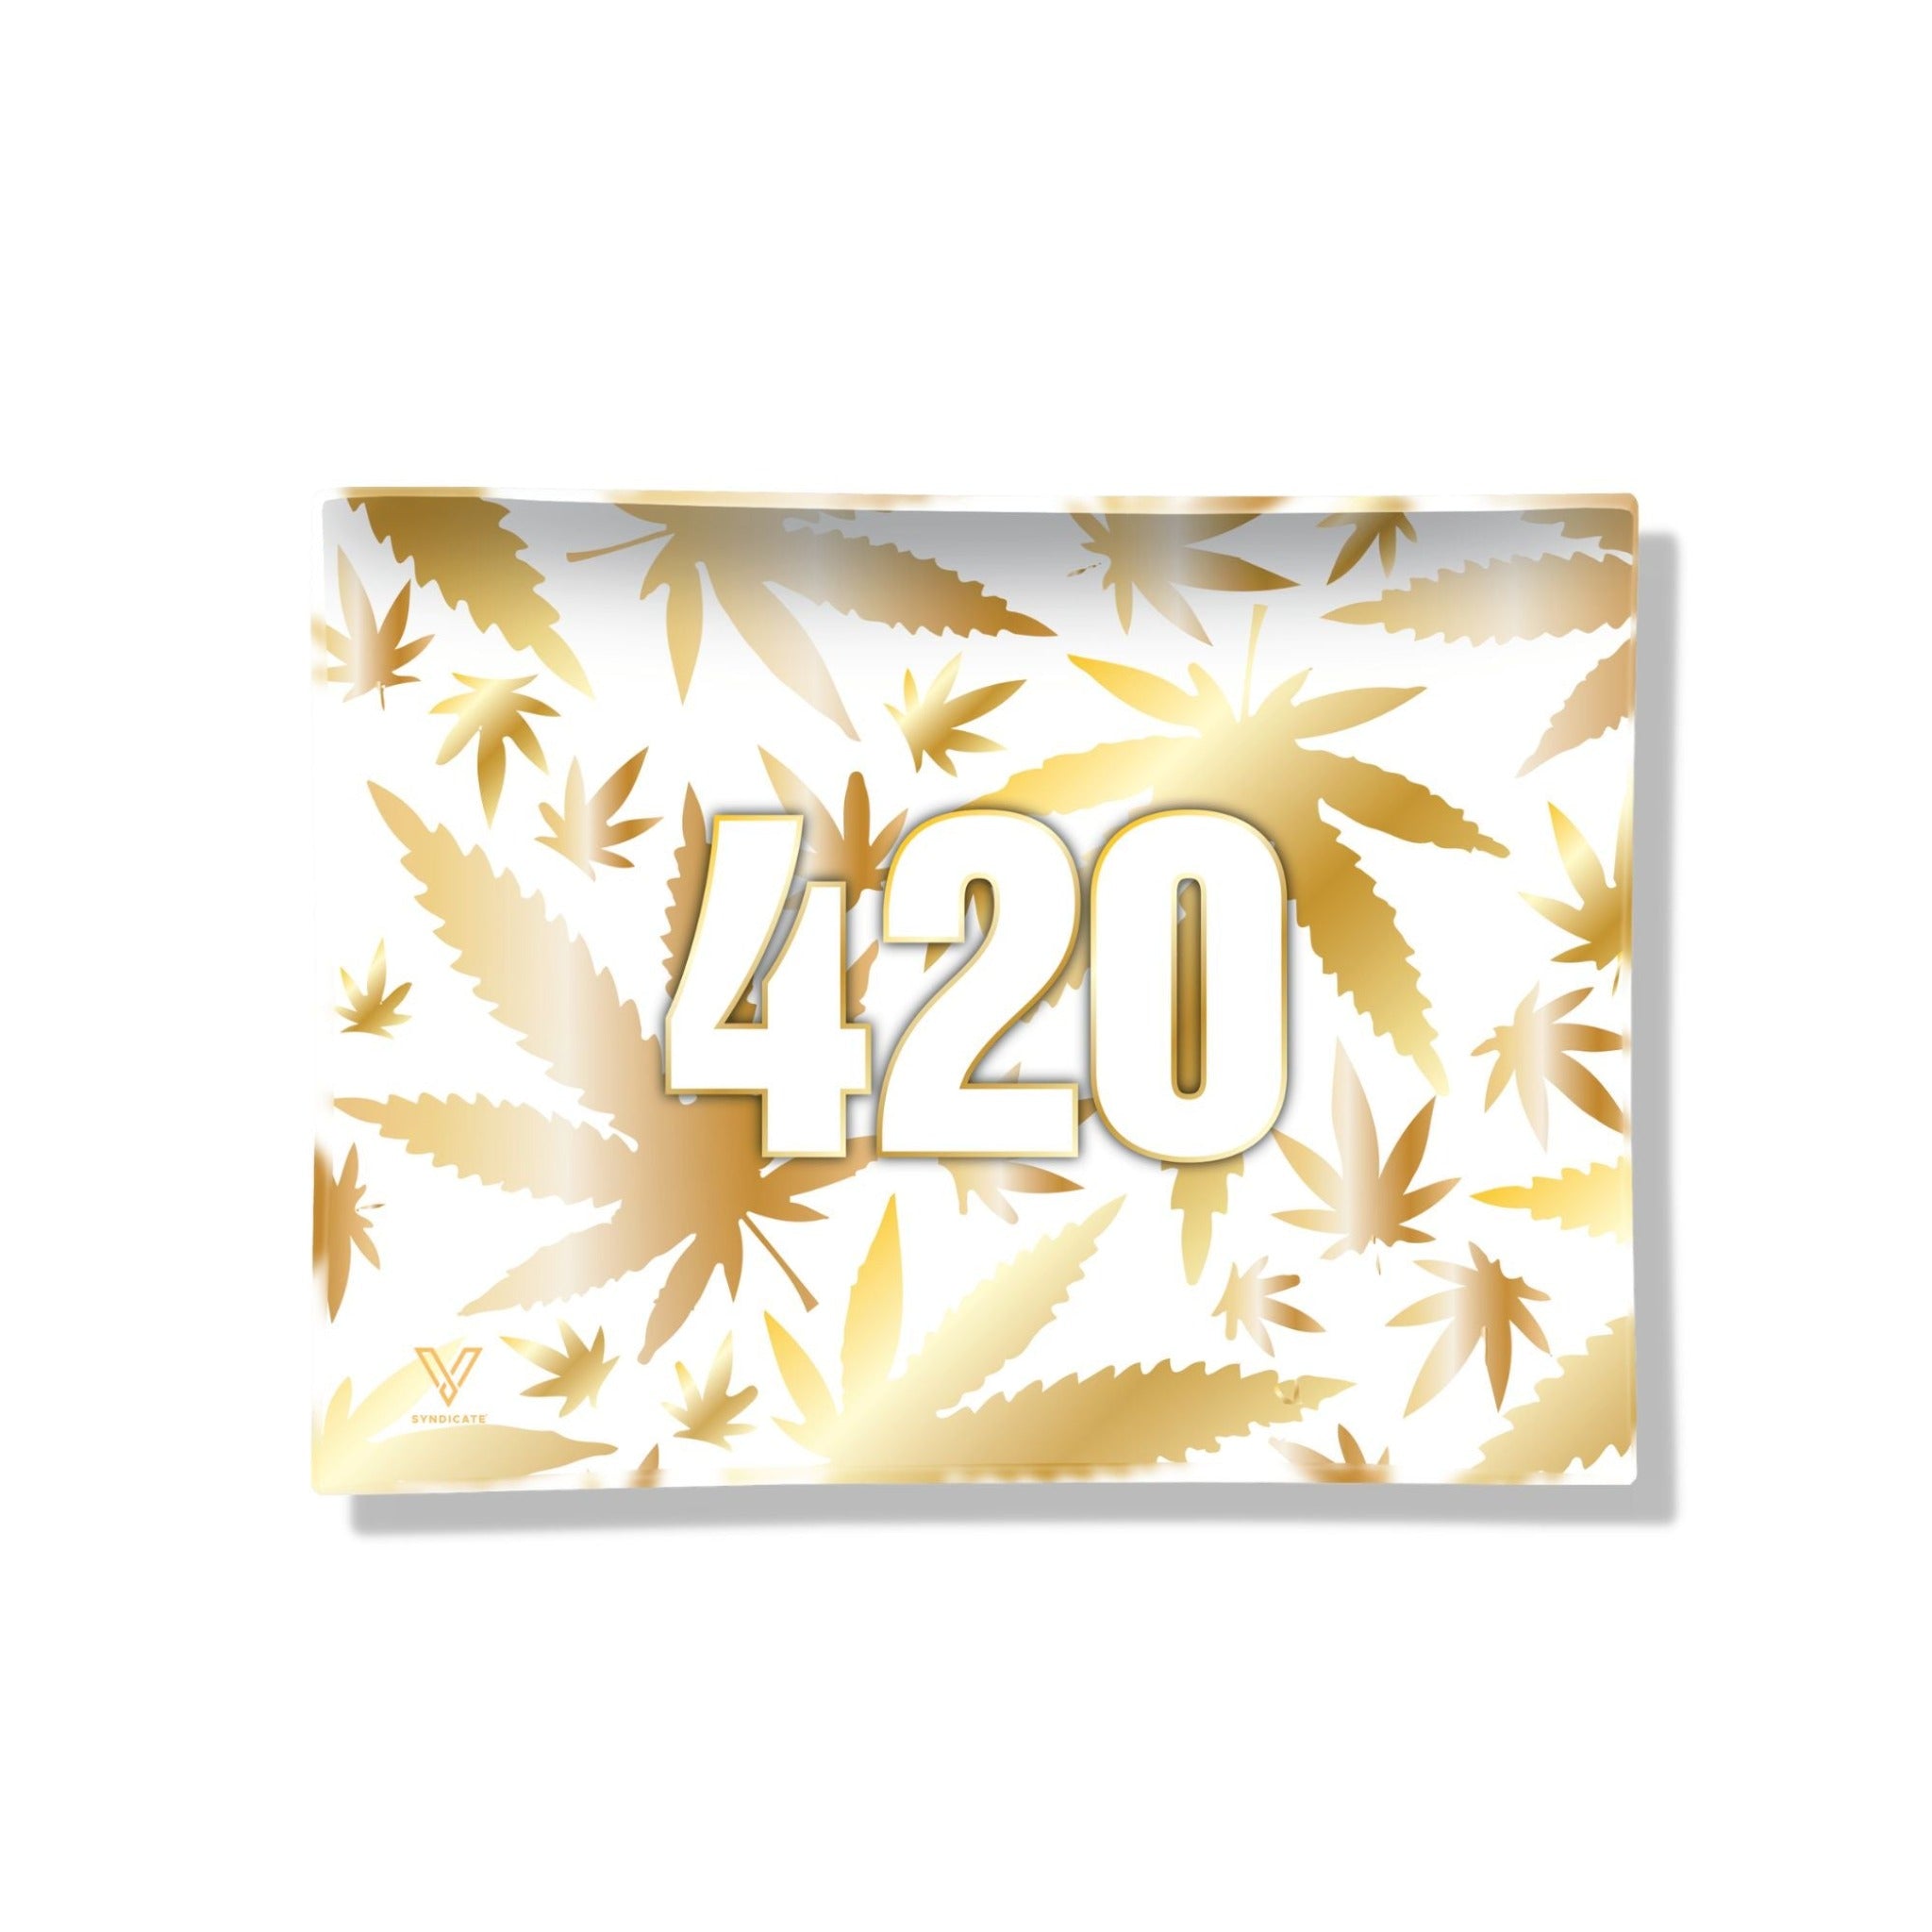 V Syndicate 420 Gold Glass Rolling Tray Rolling Tray VS Large 